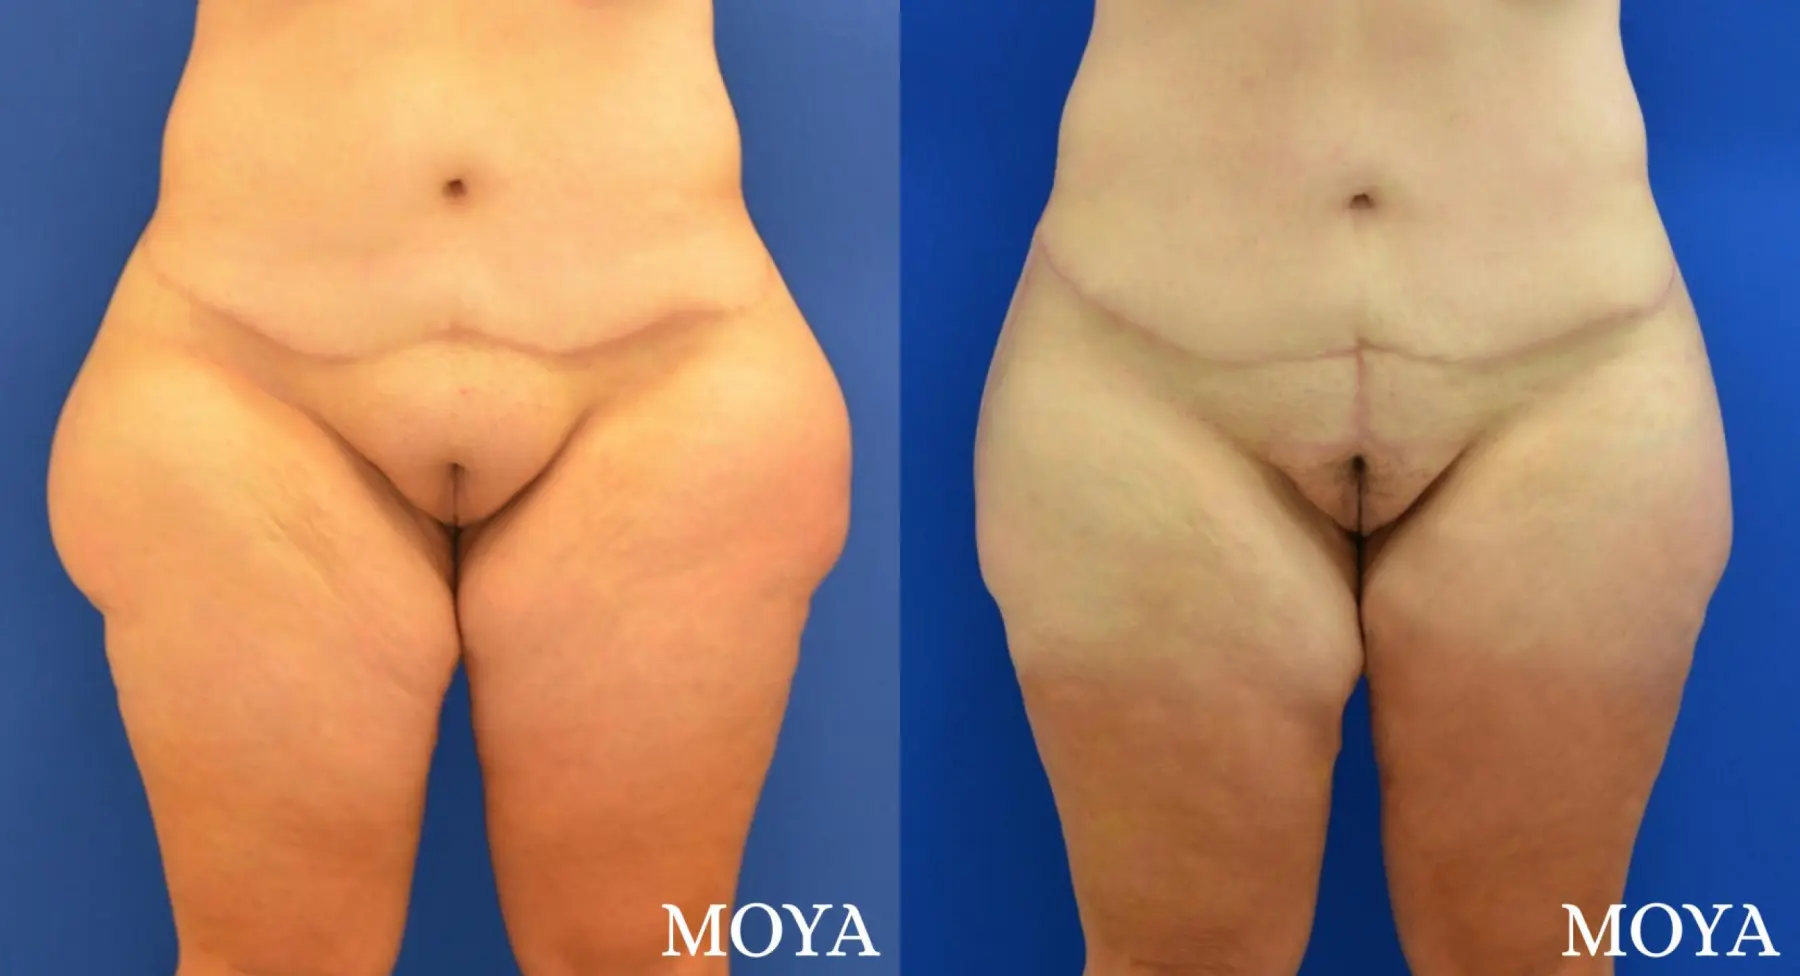 Mons Pubis Reduction: Patient 1 - Before and After 1